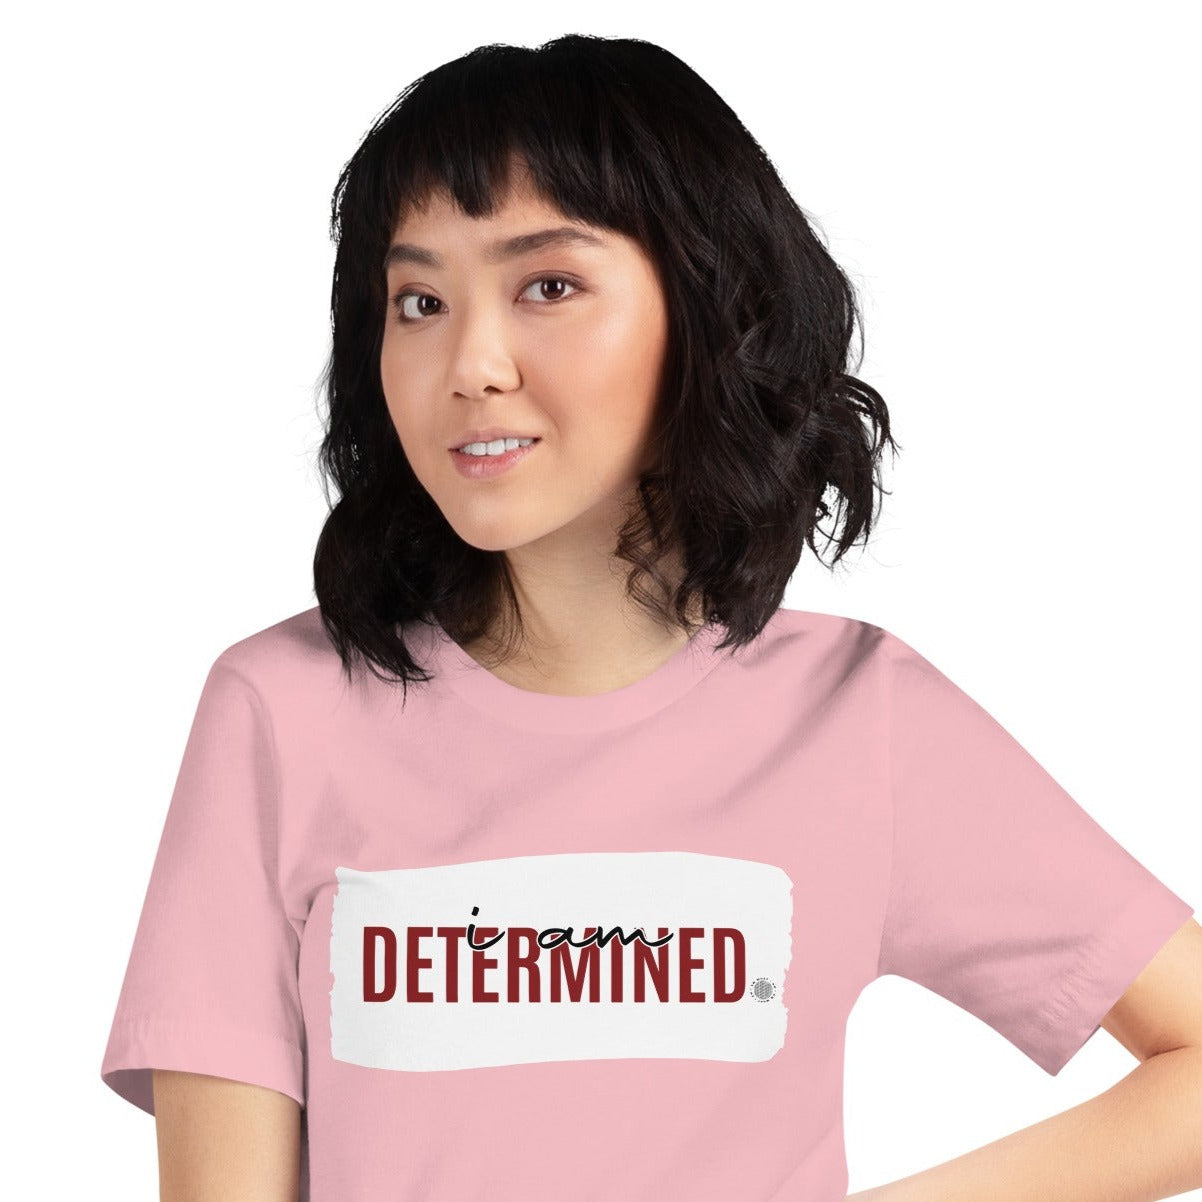 I Am Determined Adult Unisex T-Shirt pink